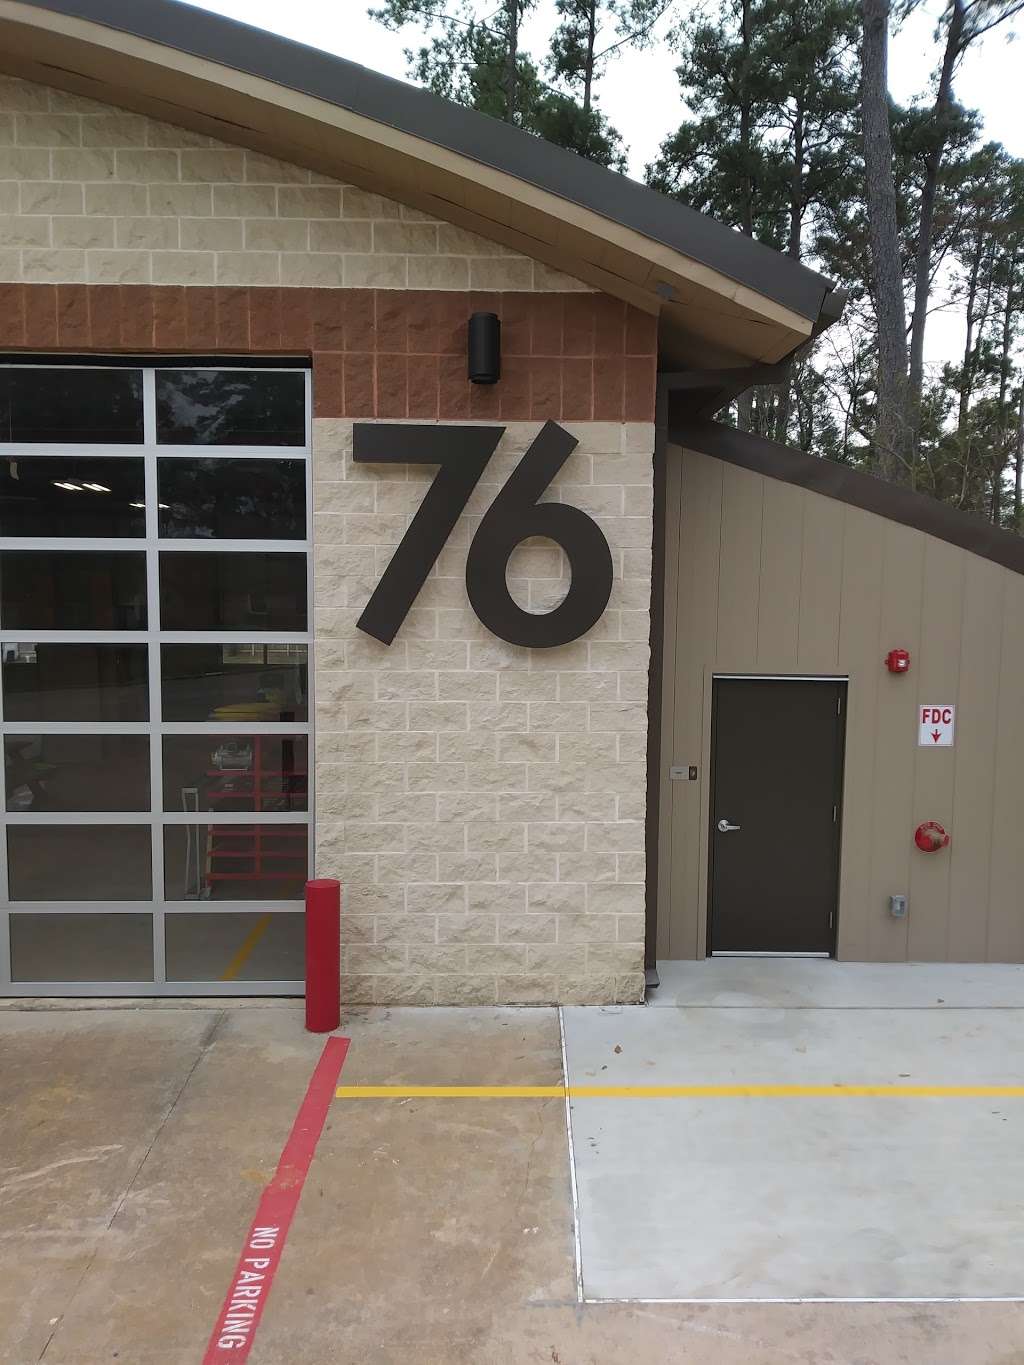 Spring Fire Department Station 76 | 8407 London Way Dr, Spring, TX 77389, USA | Phone: (281) 355-1266